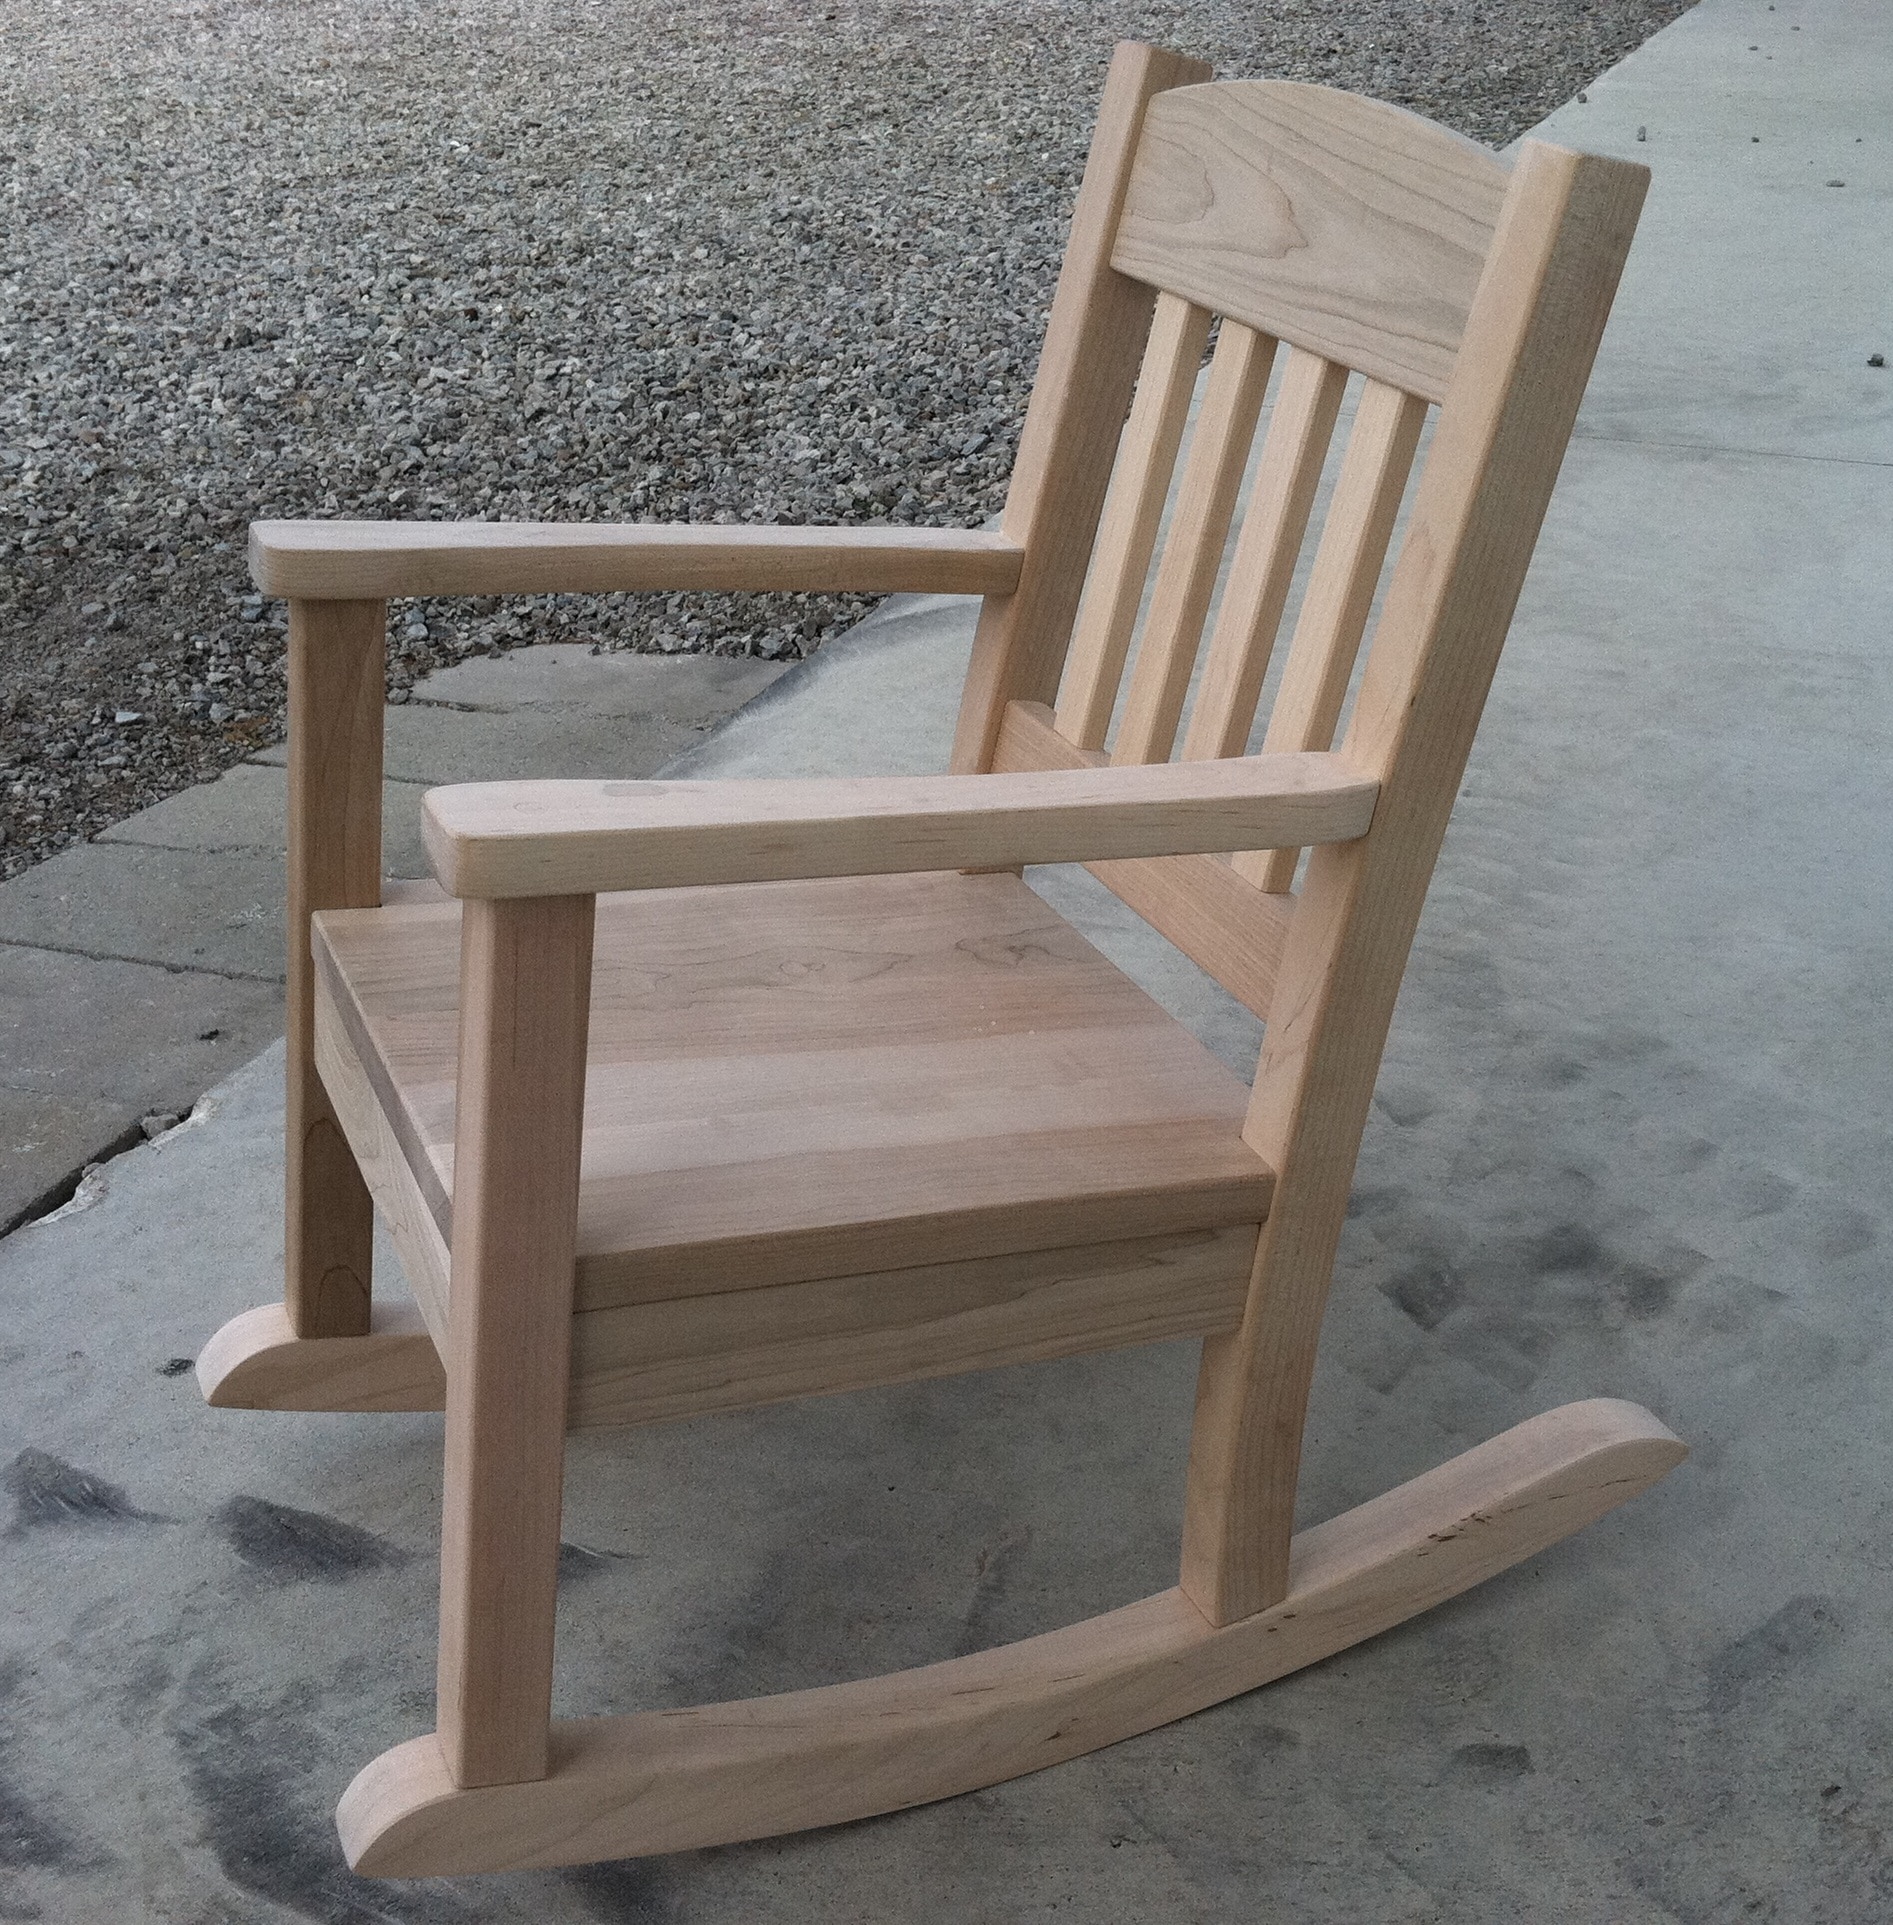 unfinished child's rocking chair